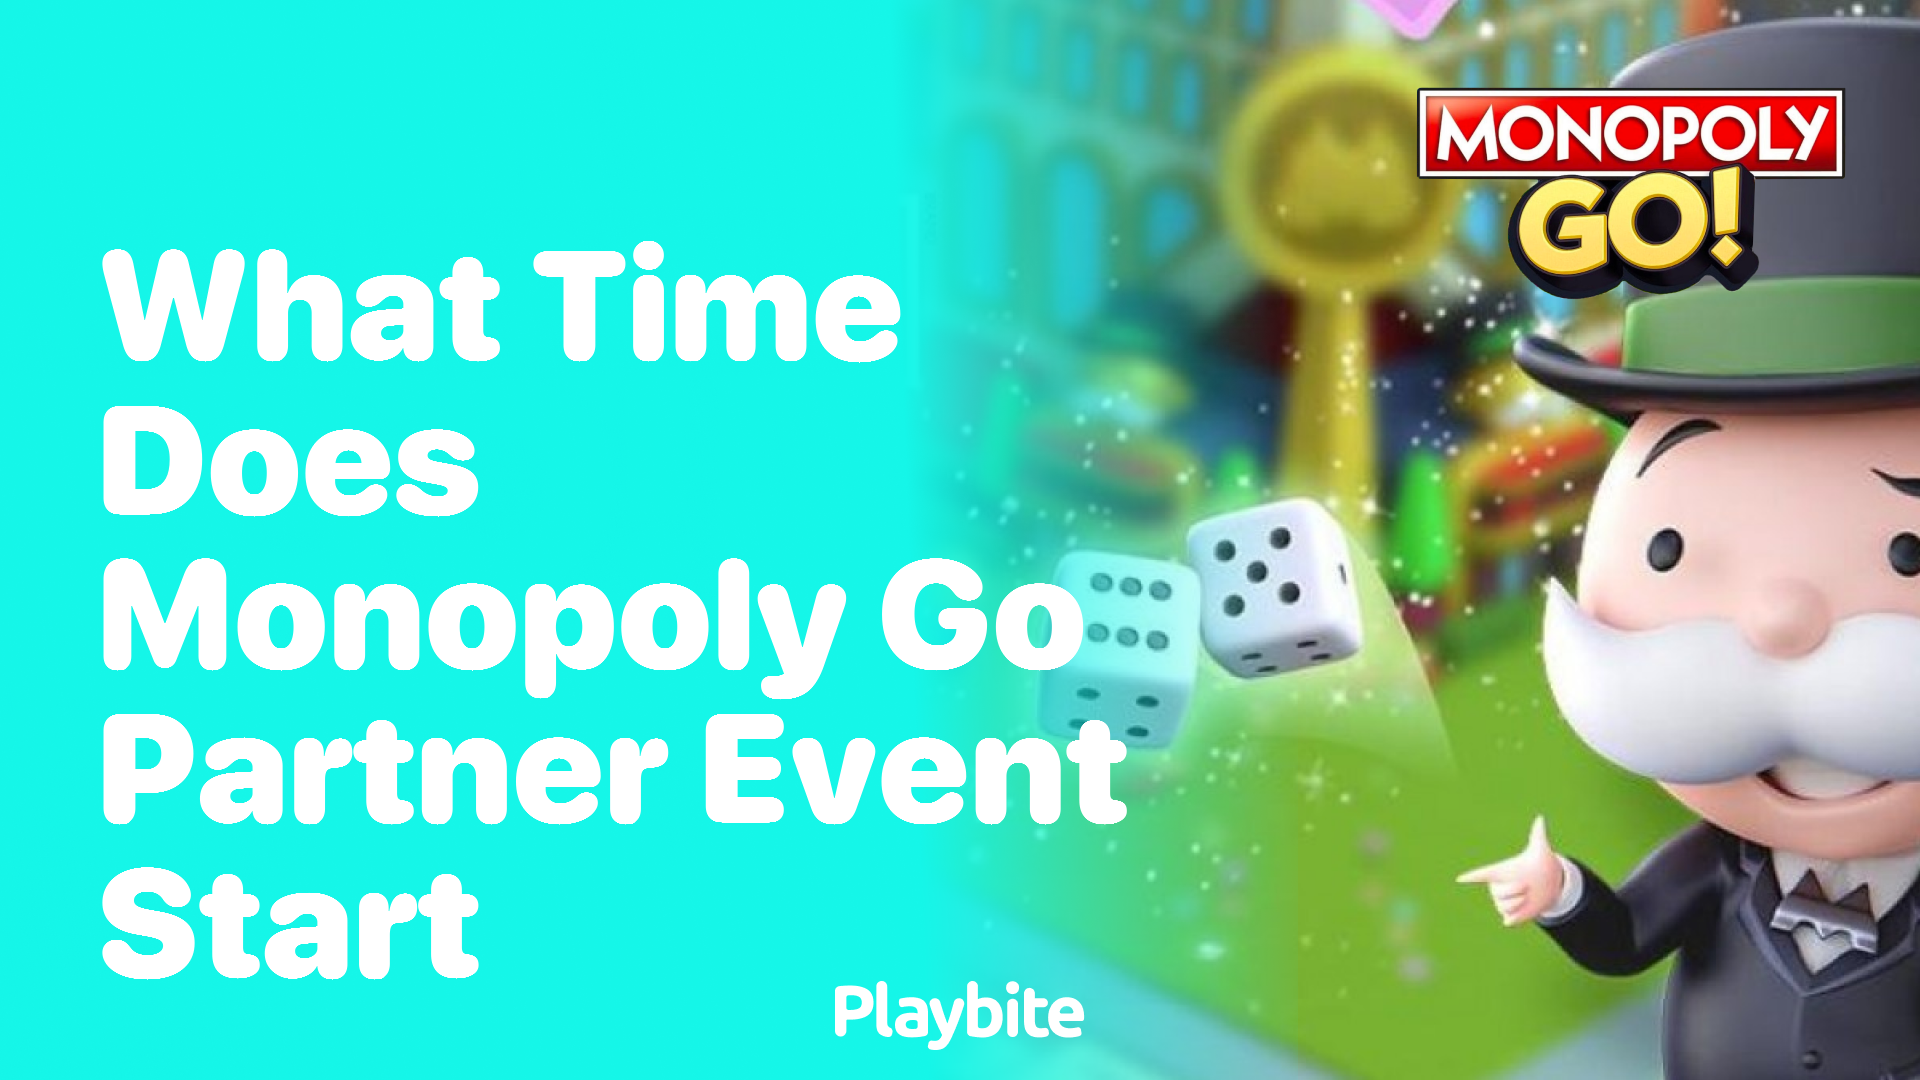 What Time Does the Monopoly Go Partner Event Start?